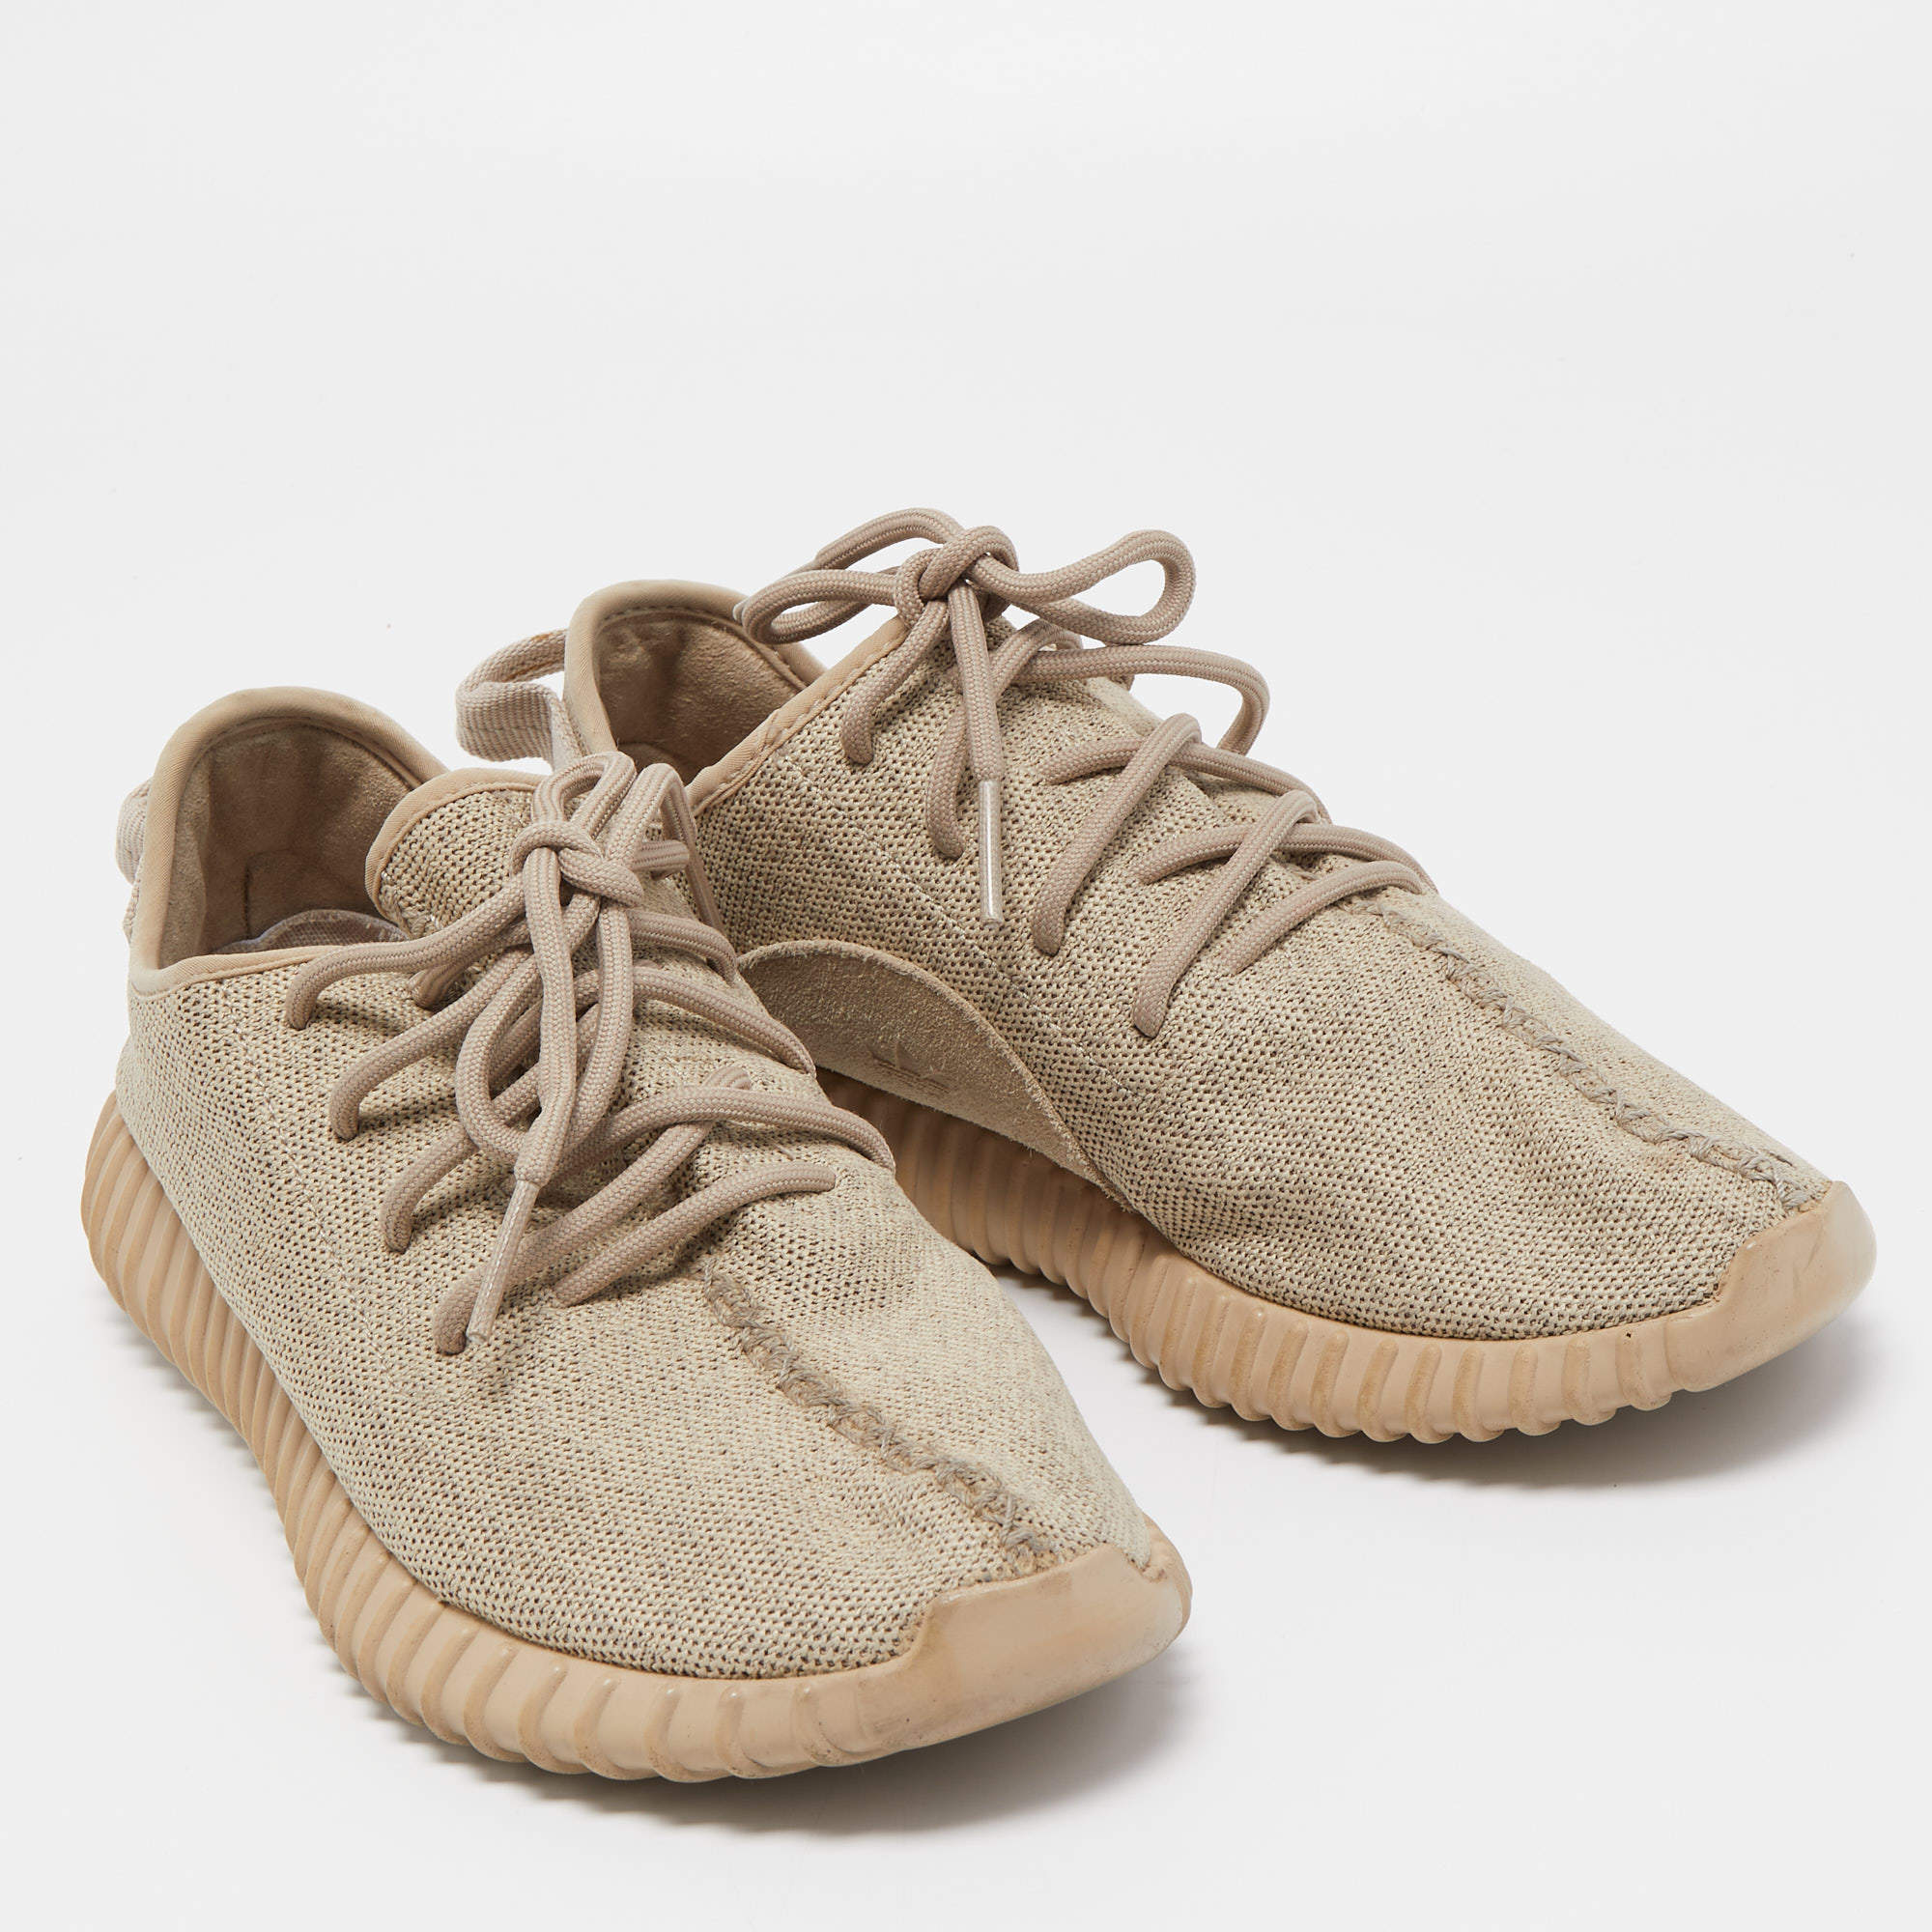 Yeezy x Adidas Brown Suede Boost 350 V2 Oxford Tan Sneakers Size 42 Yeezy x  Adidas